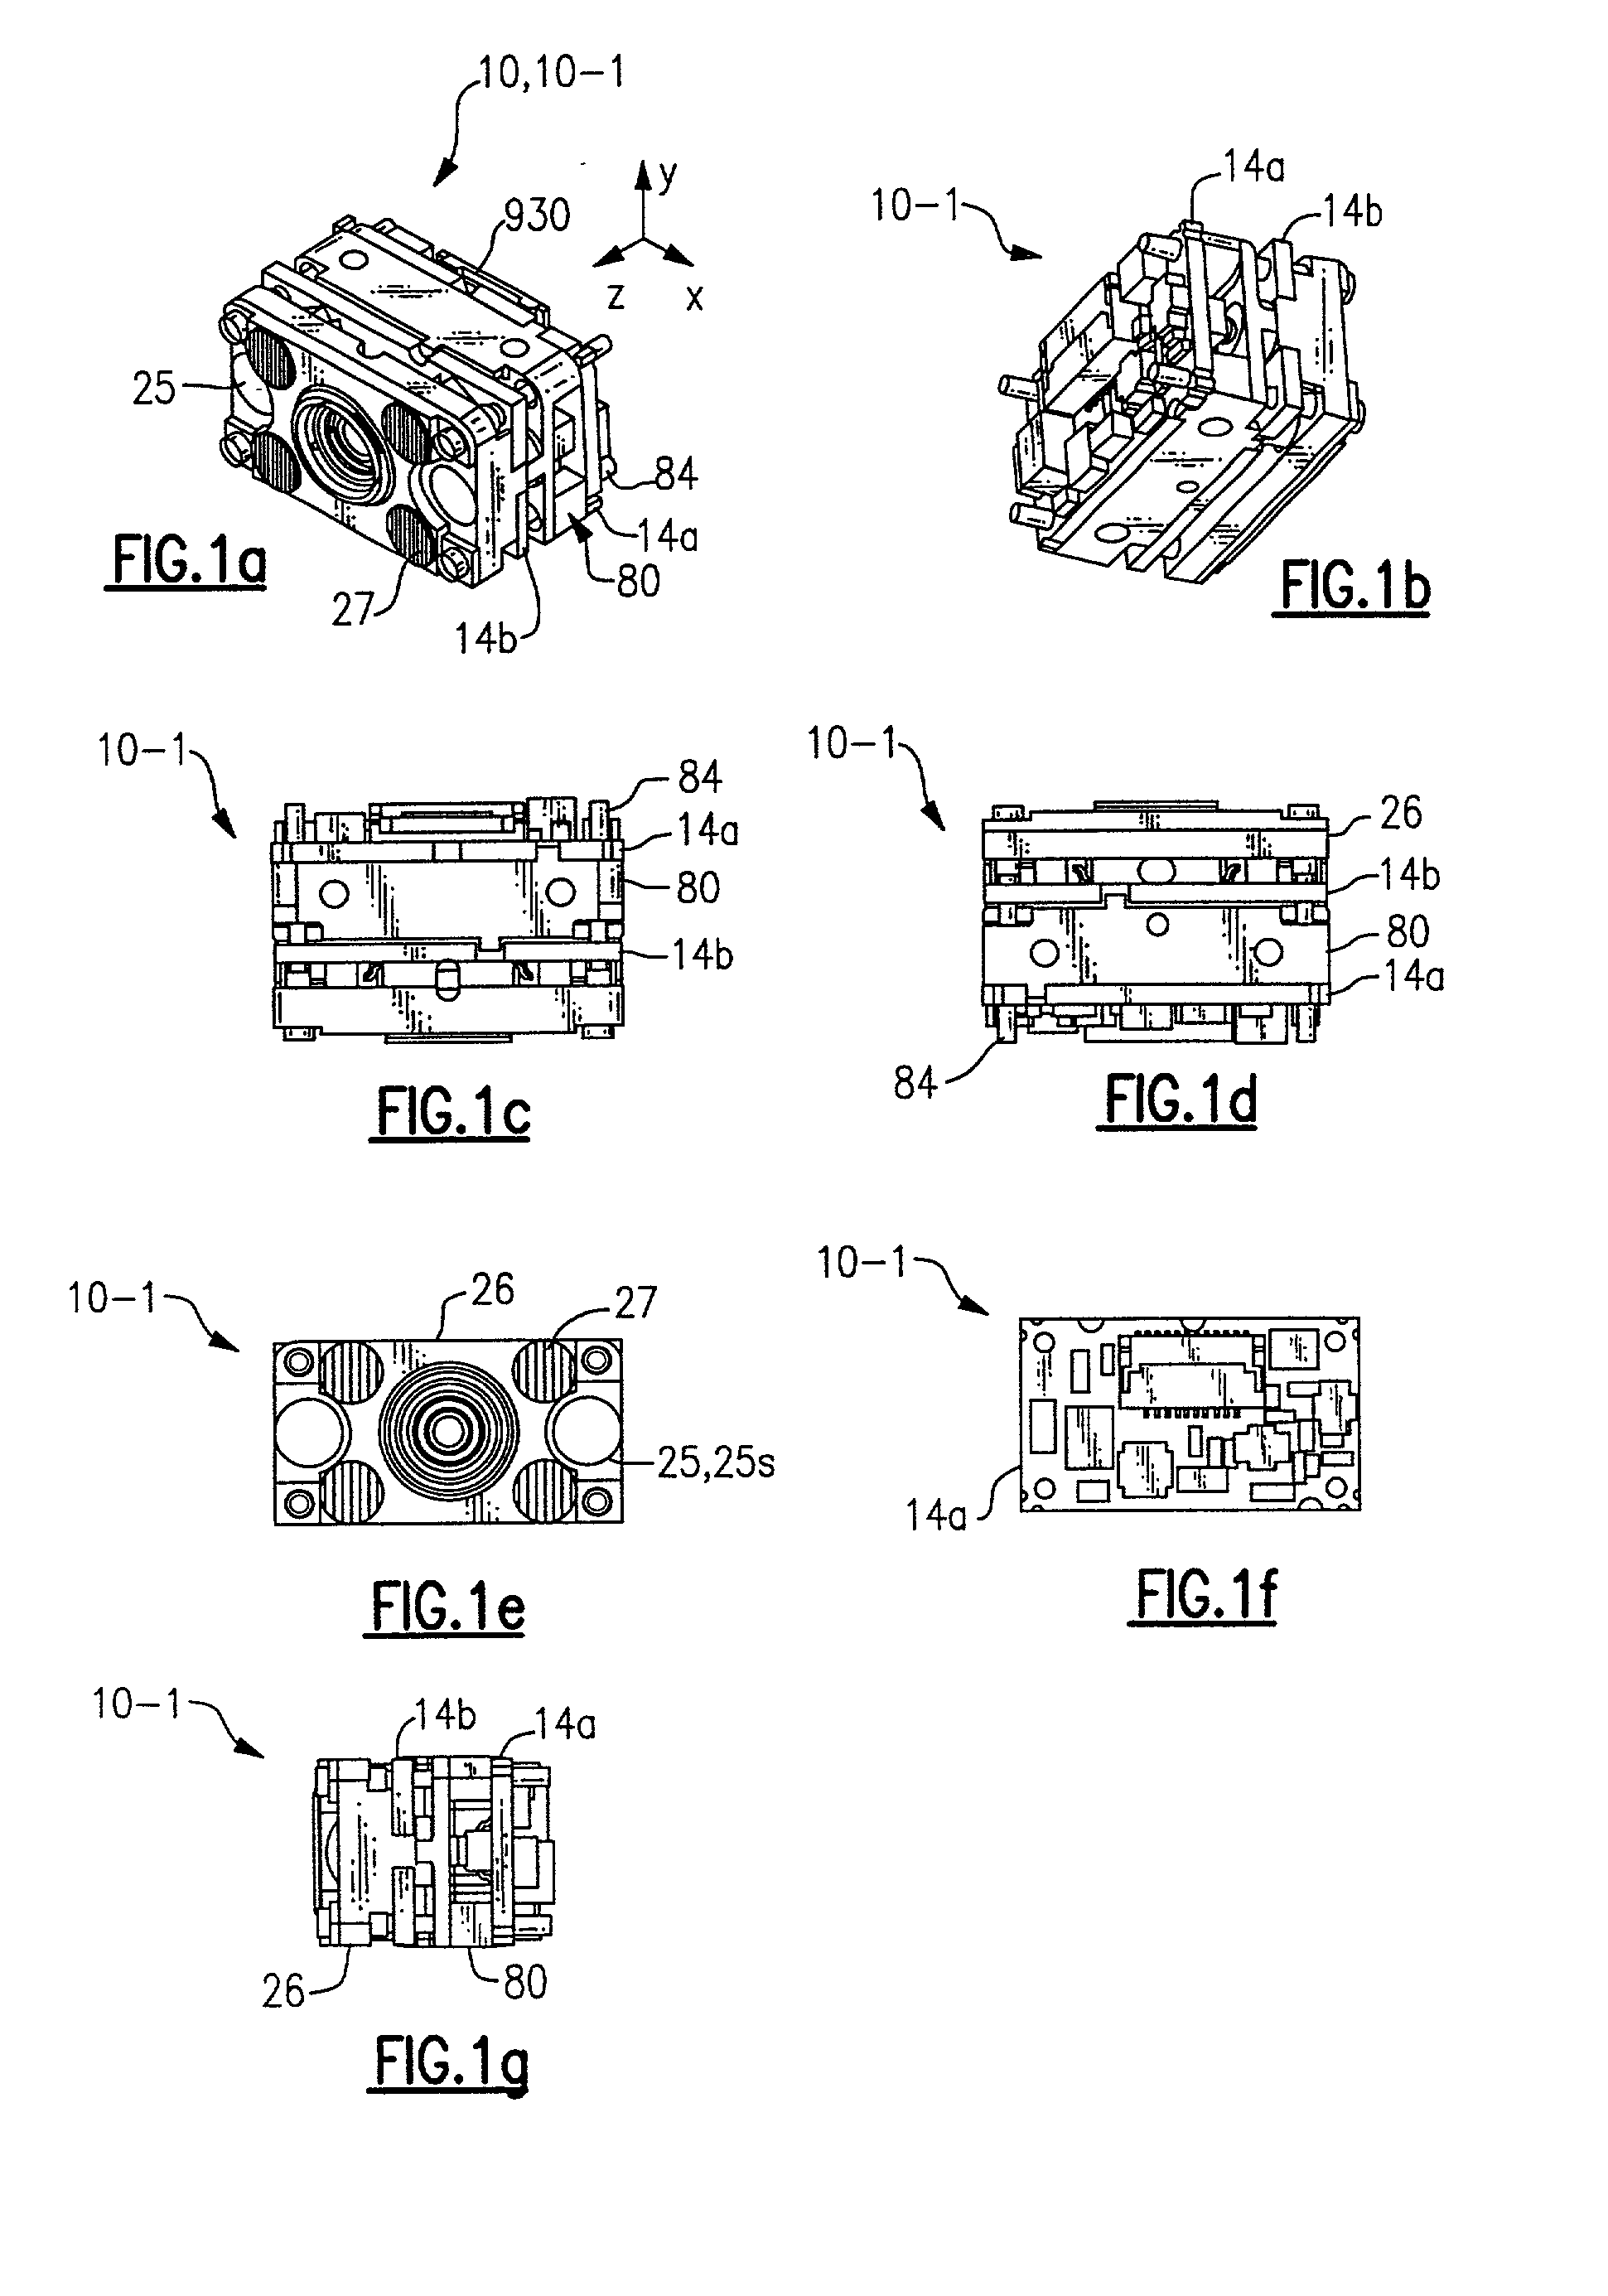 Optical reader aiming assembly comprising aperture